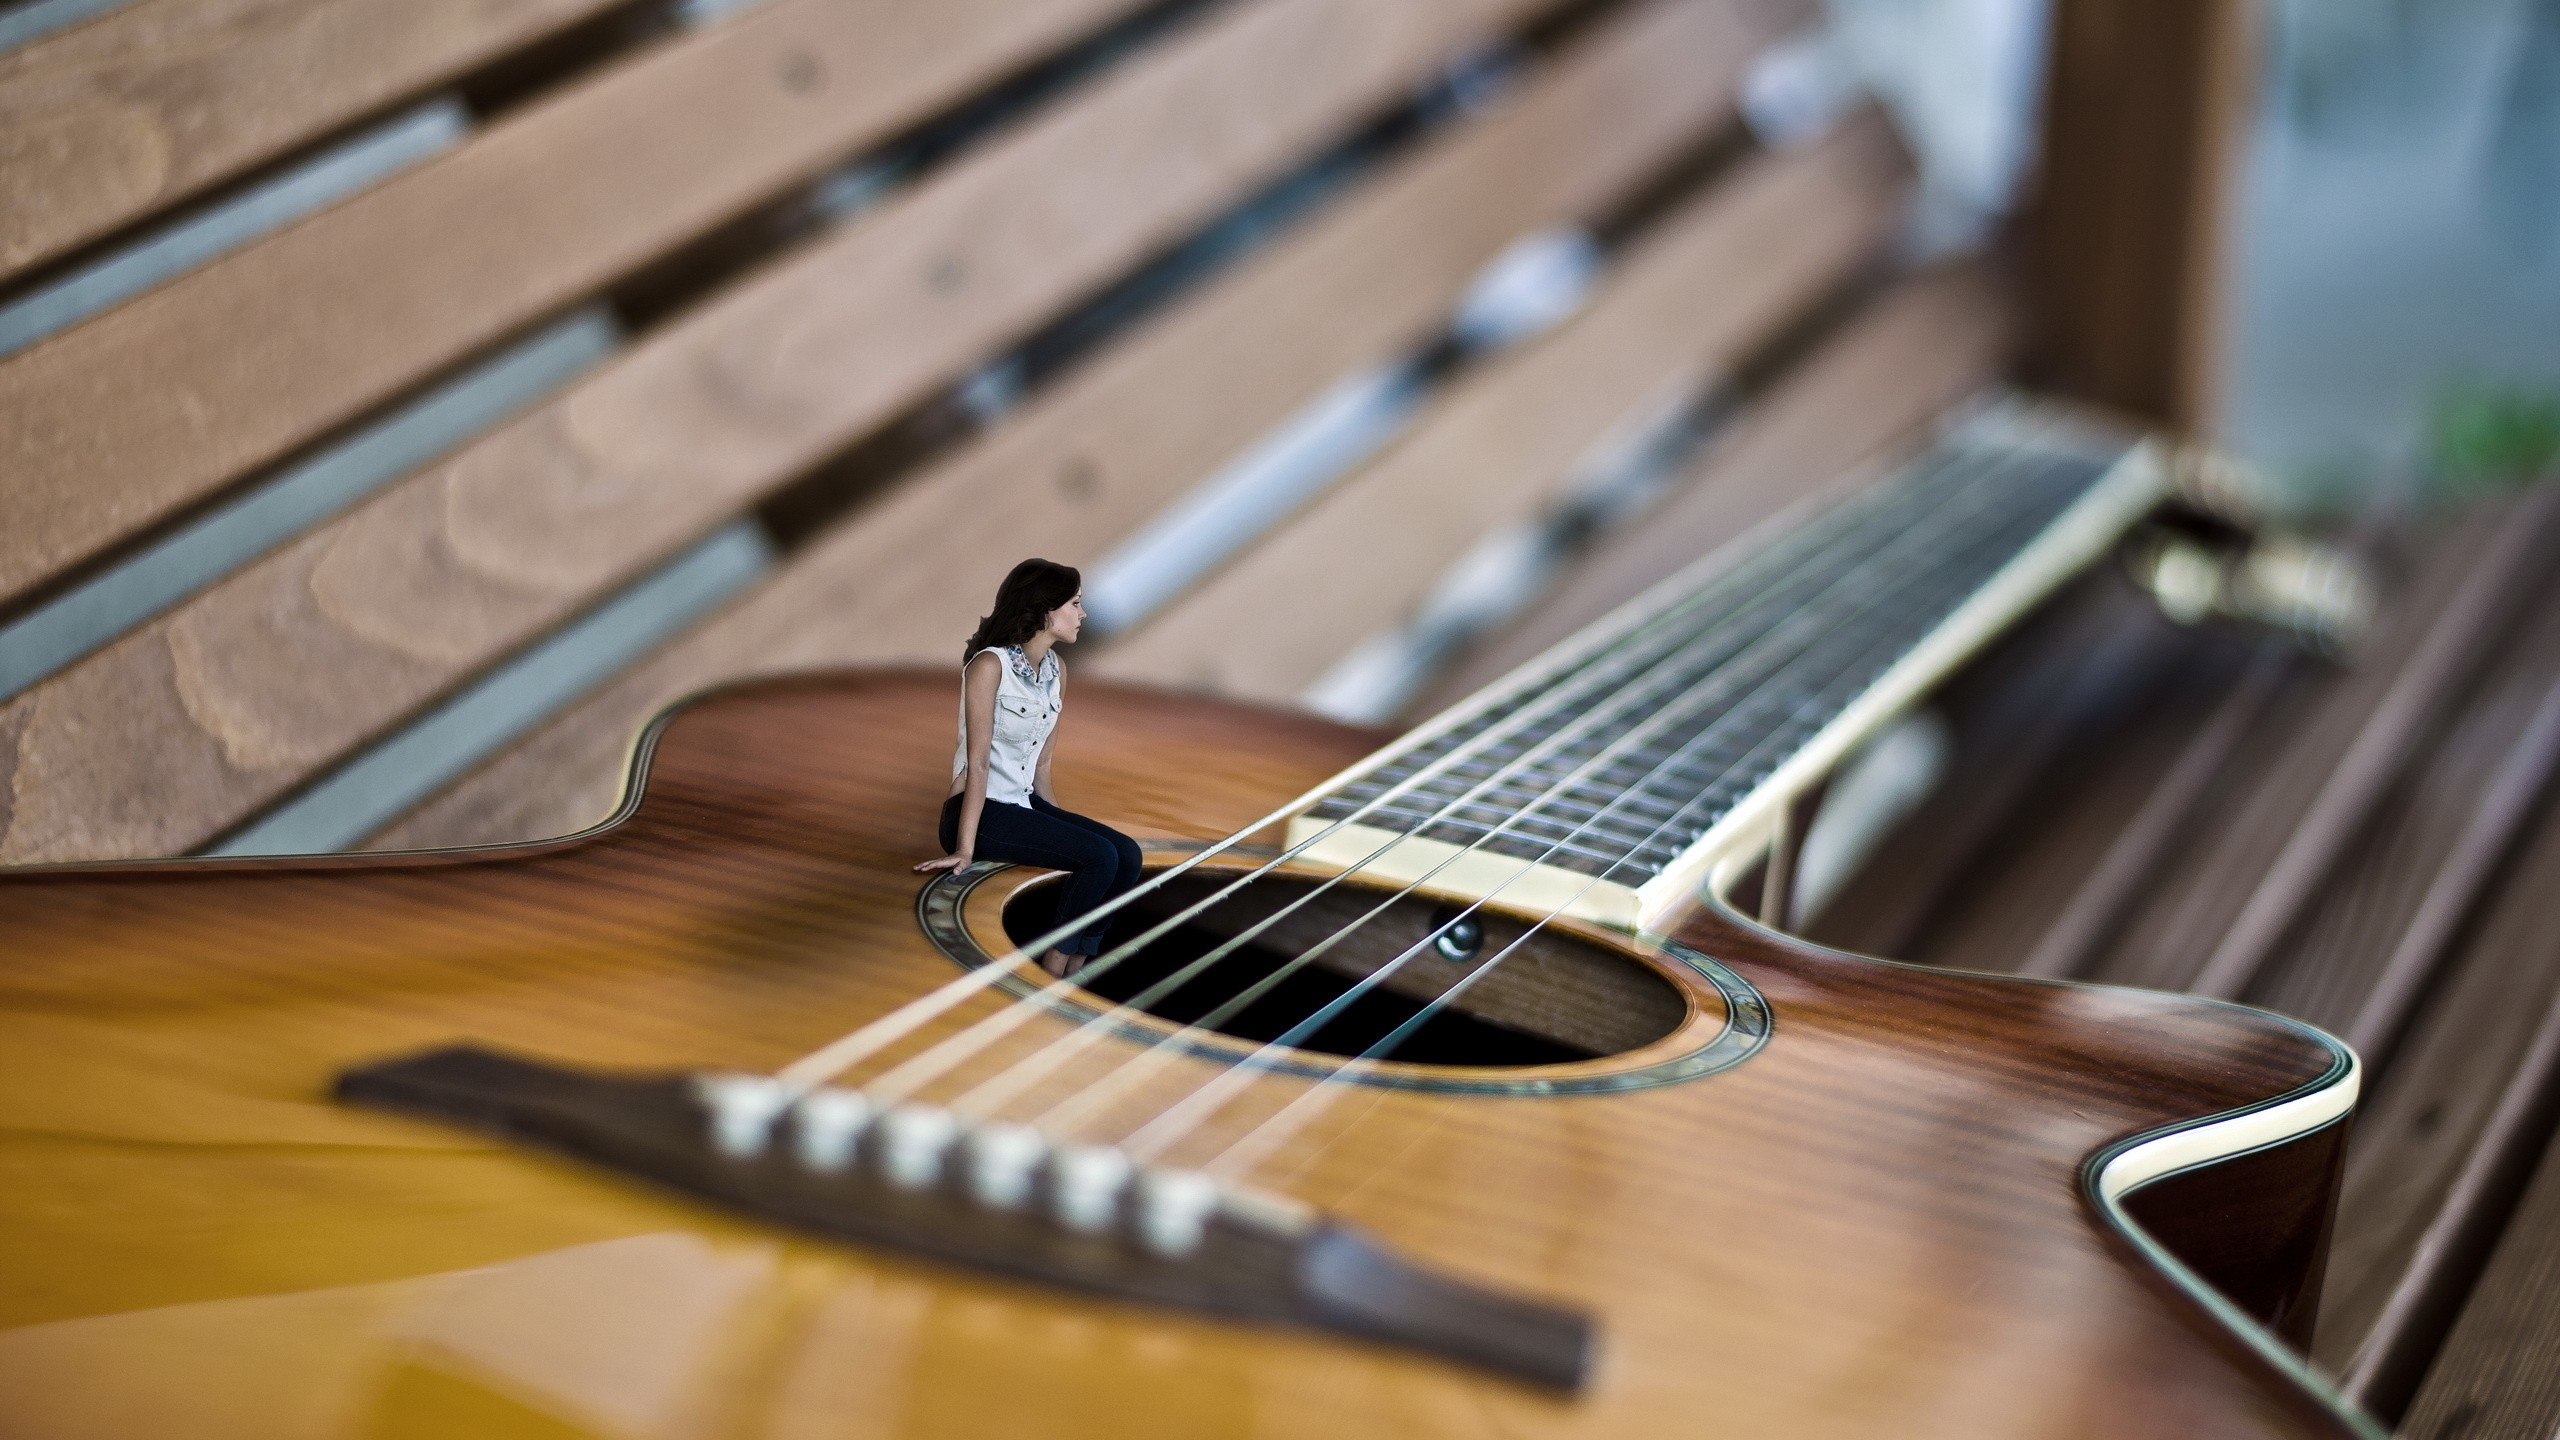 General 2560x1440 wood wooden surface planks bench guitar women macro photo manipulation miniatures depth of field photoshopped jeans sitting looking away shirt musical instrument